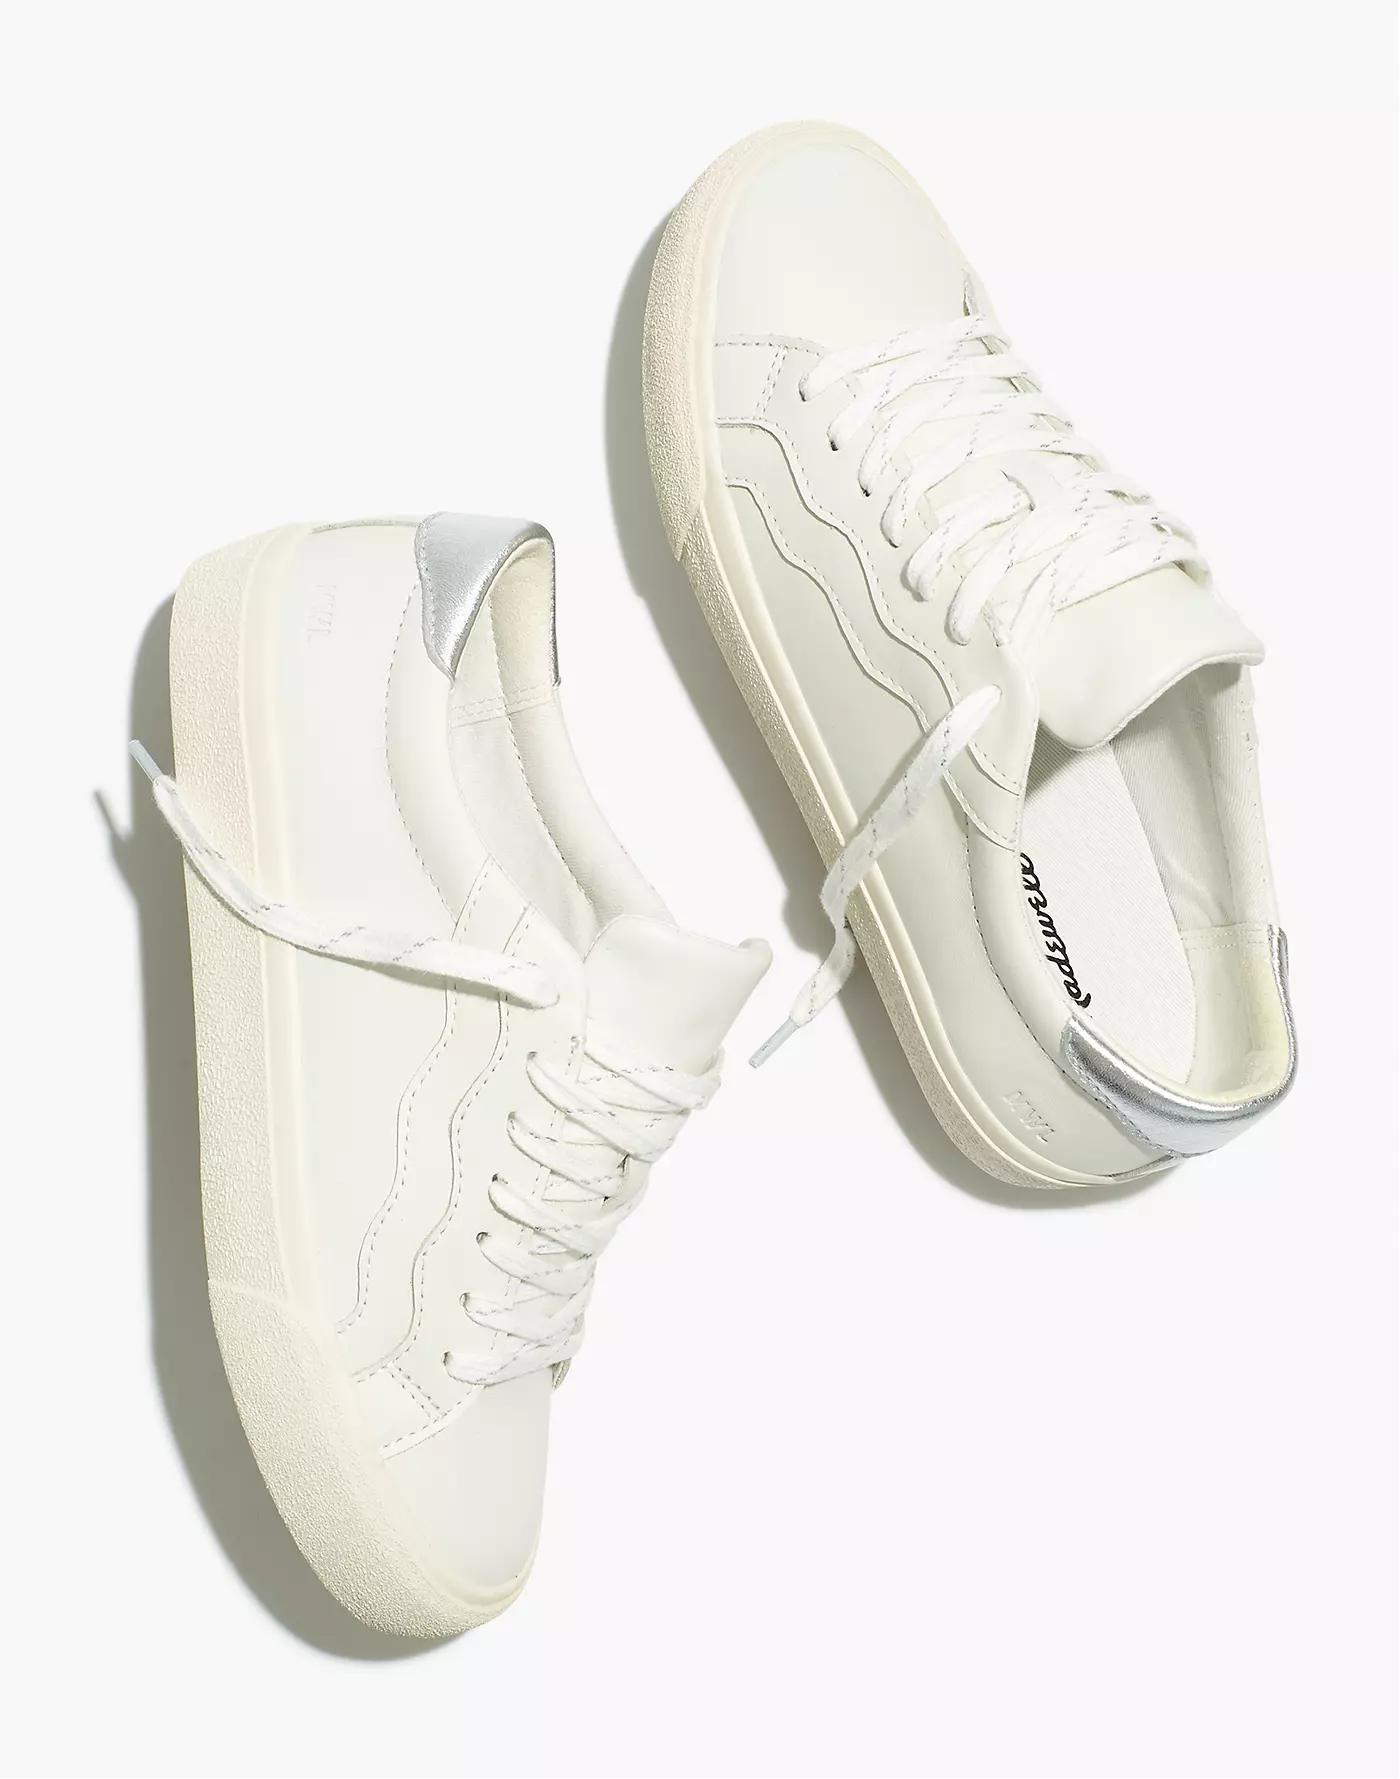 Madewell + Sidewalk LowTop Sneakers in Leather Wave Edition